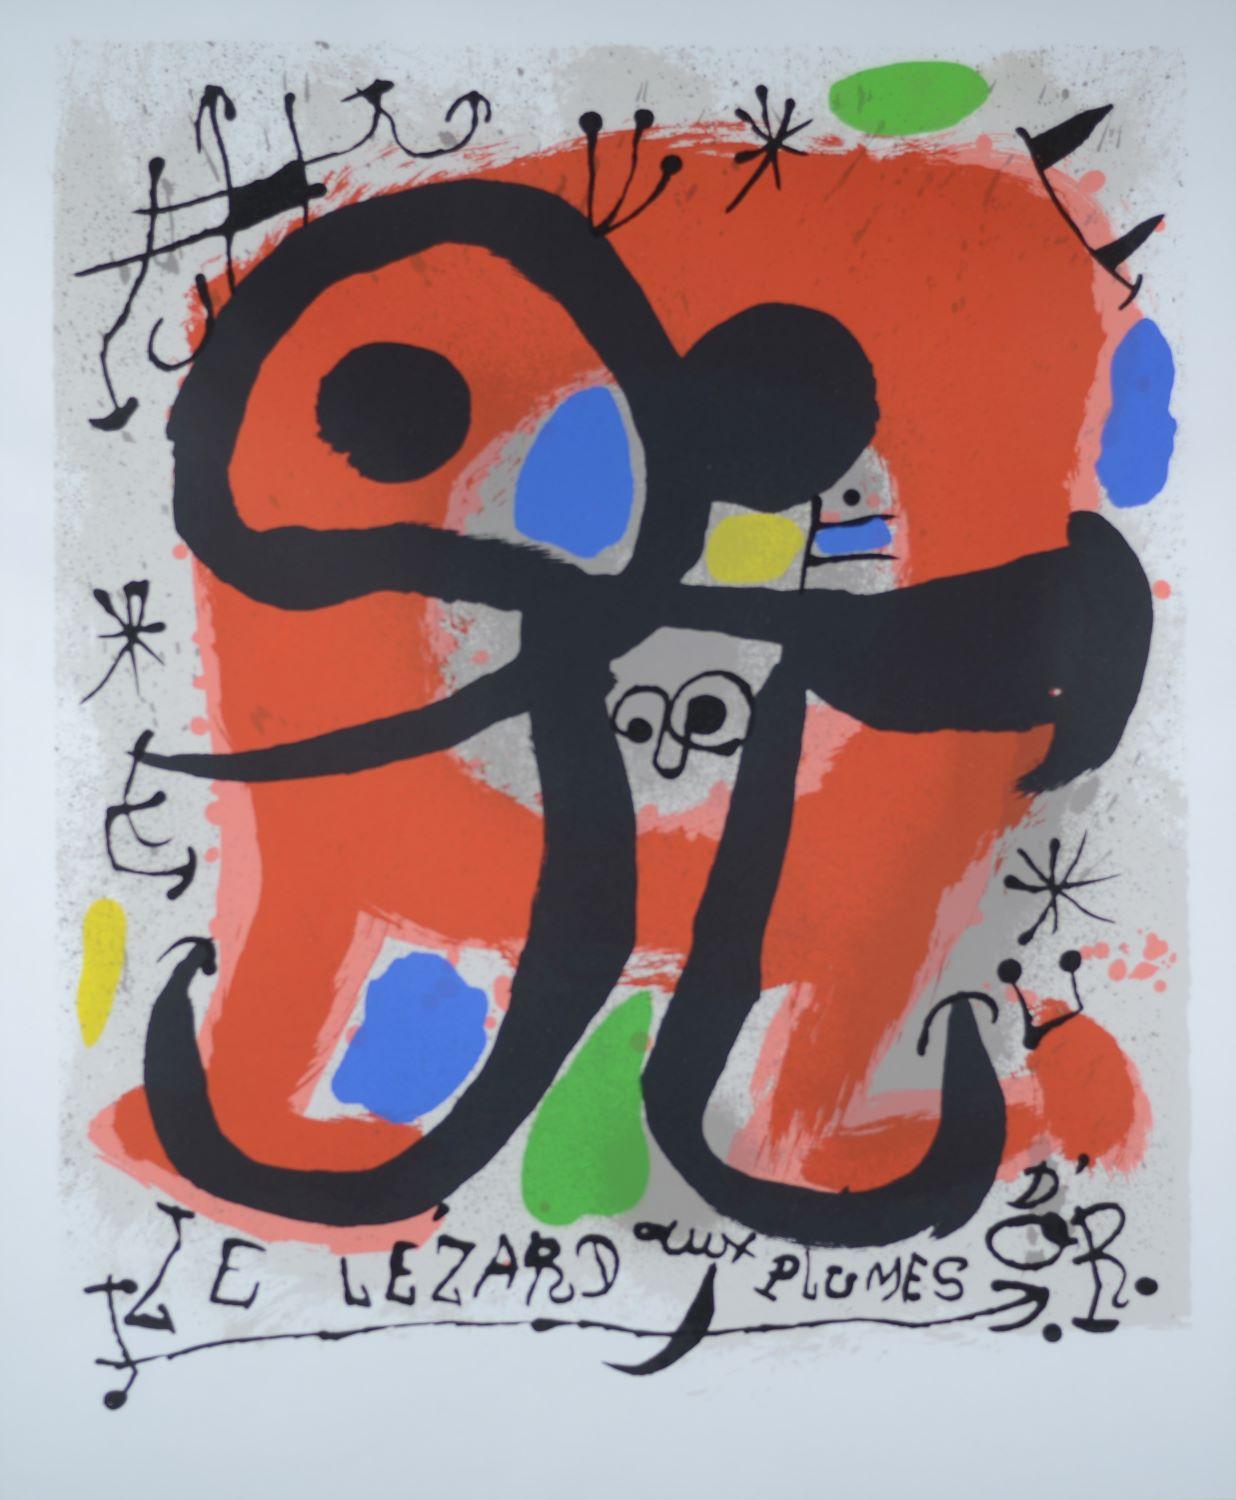 Large bright Miro Lithograph Le Lezard aux Plumes D'Or signed on plate framed - Art by Joan Miró